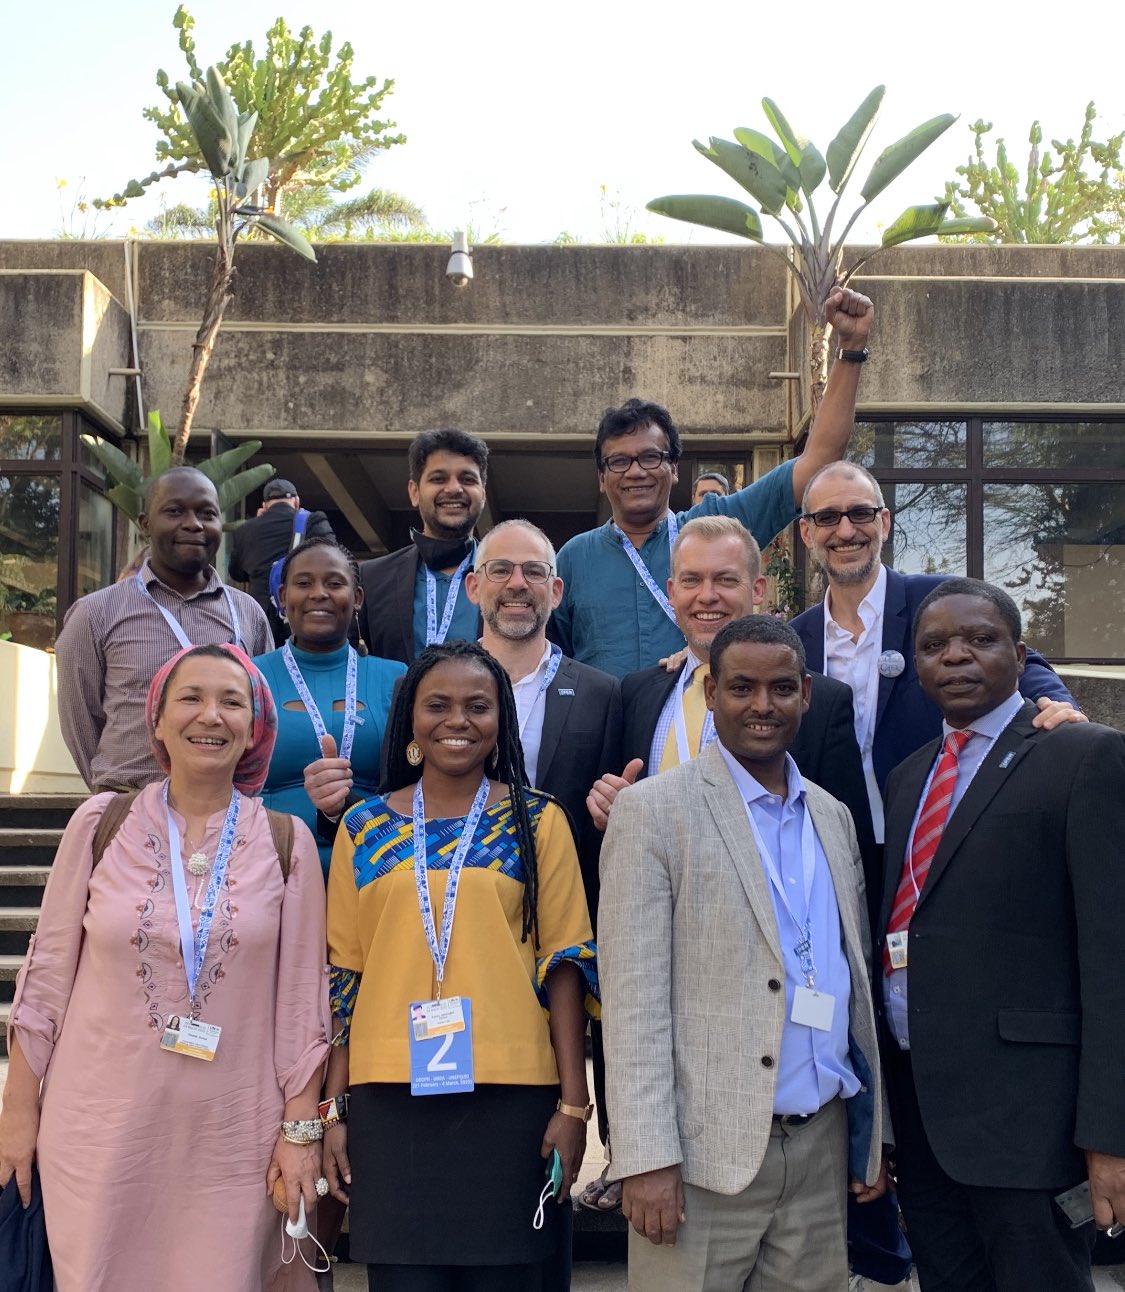 IPENers gathered after the successful resolution for an international treaty on plastics, Nairobi, Kenya, March 2022